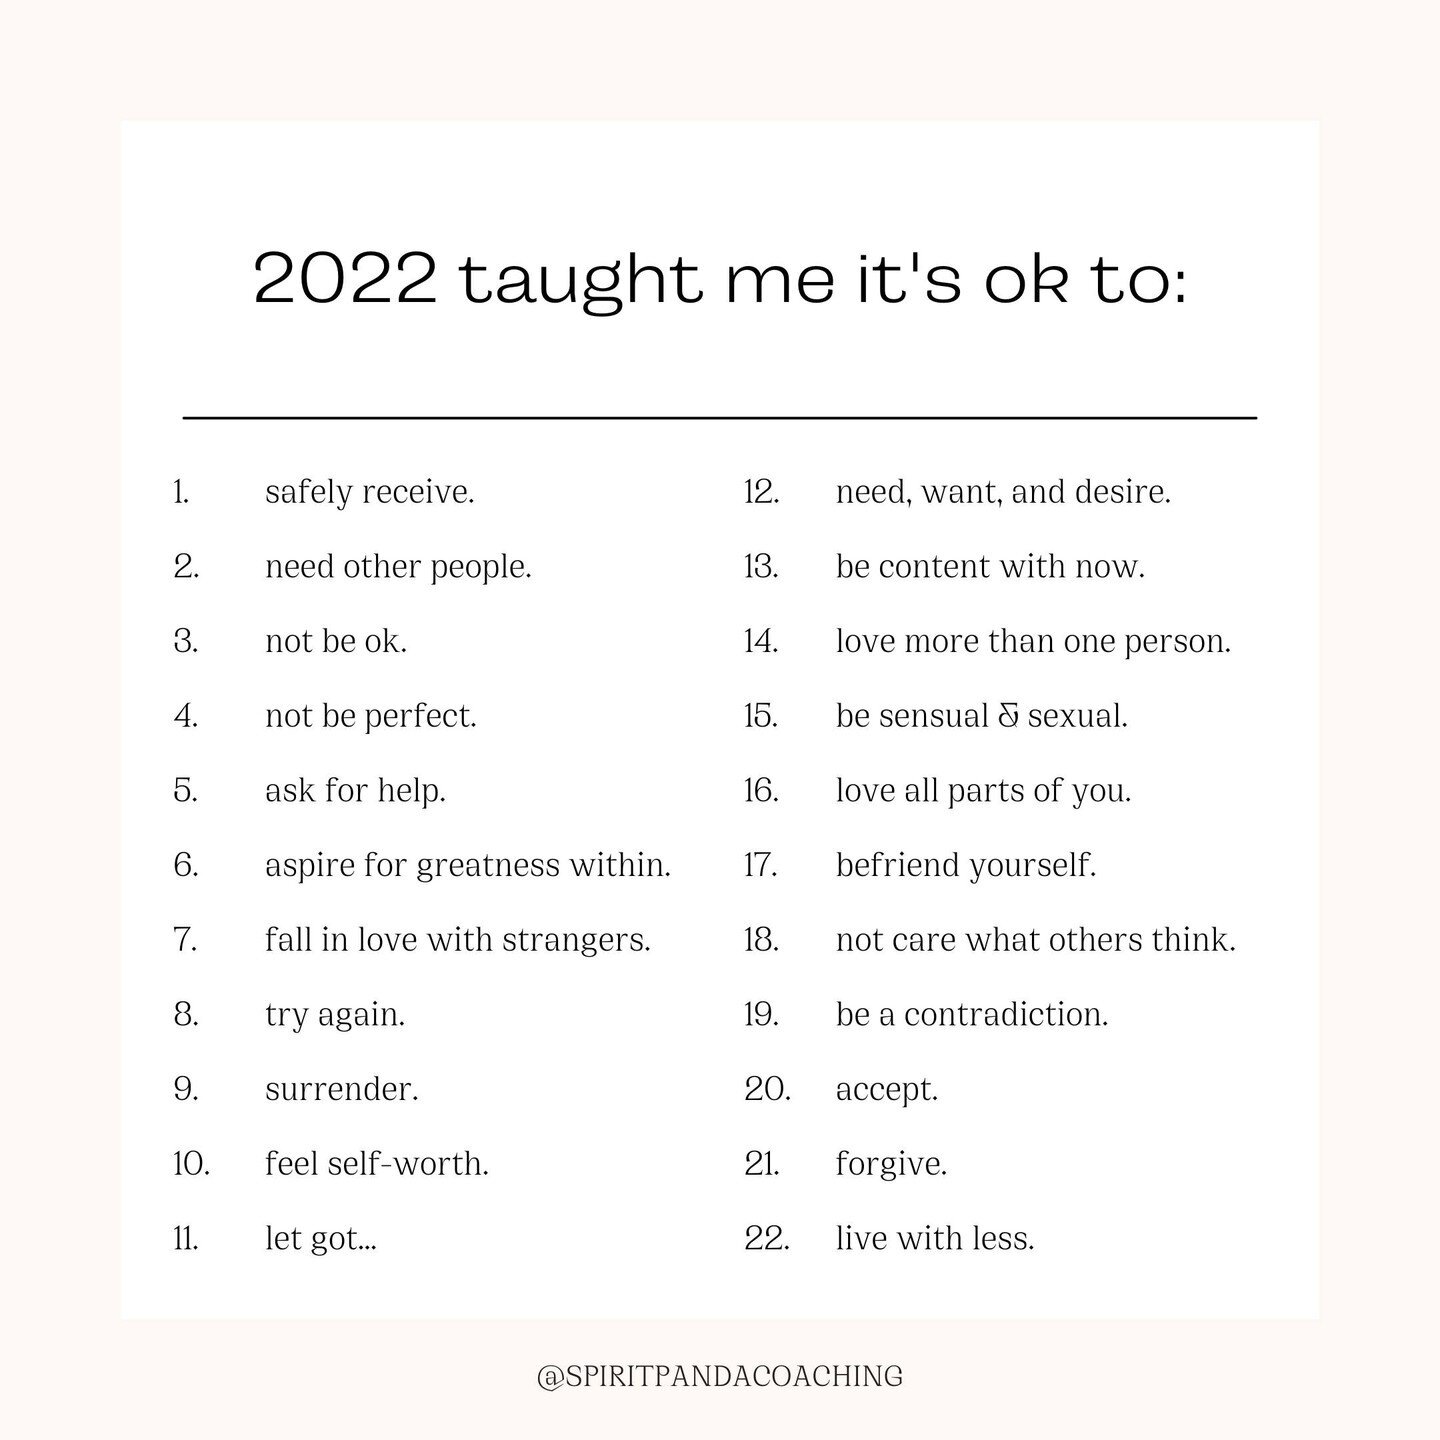 Do you enjoy reading sappy stories about gratitude? (I poured my ❤️&zwj;🩹 out for this end-of-year recap.)

Here is the link to read the full blog article: https://buff.ly/3WBHIGn

What are your highlights (high and lows) for 2022? Please share them